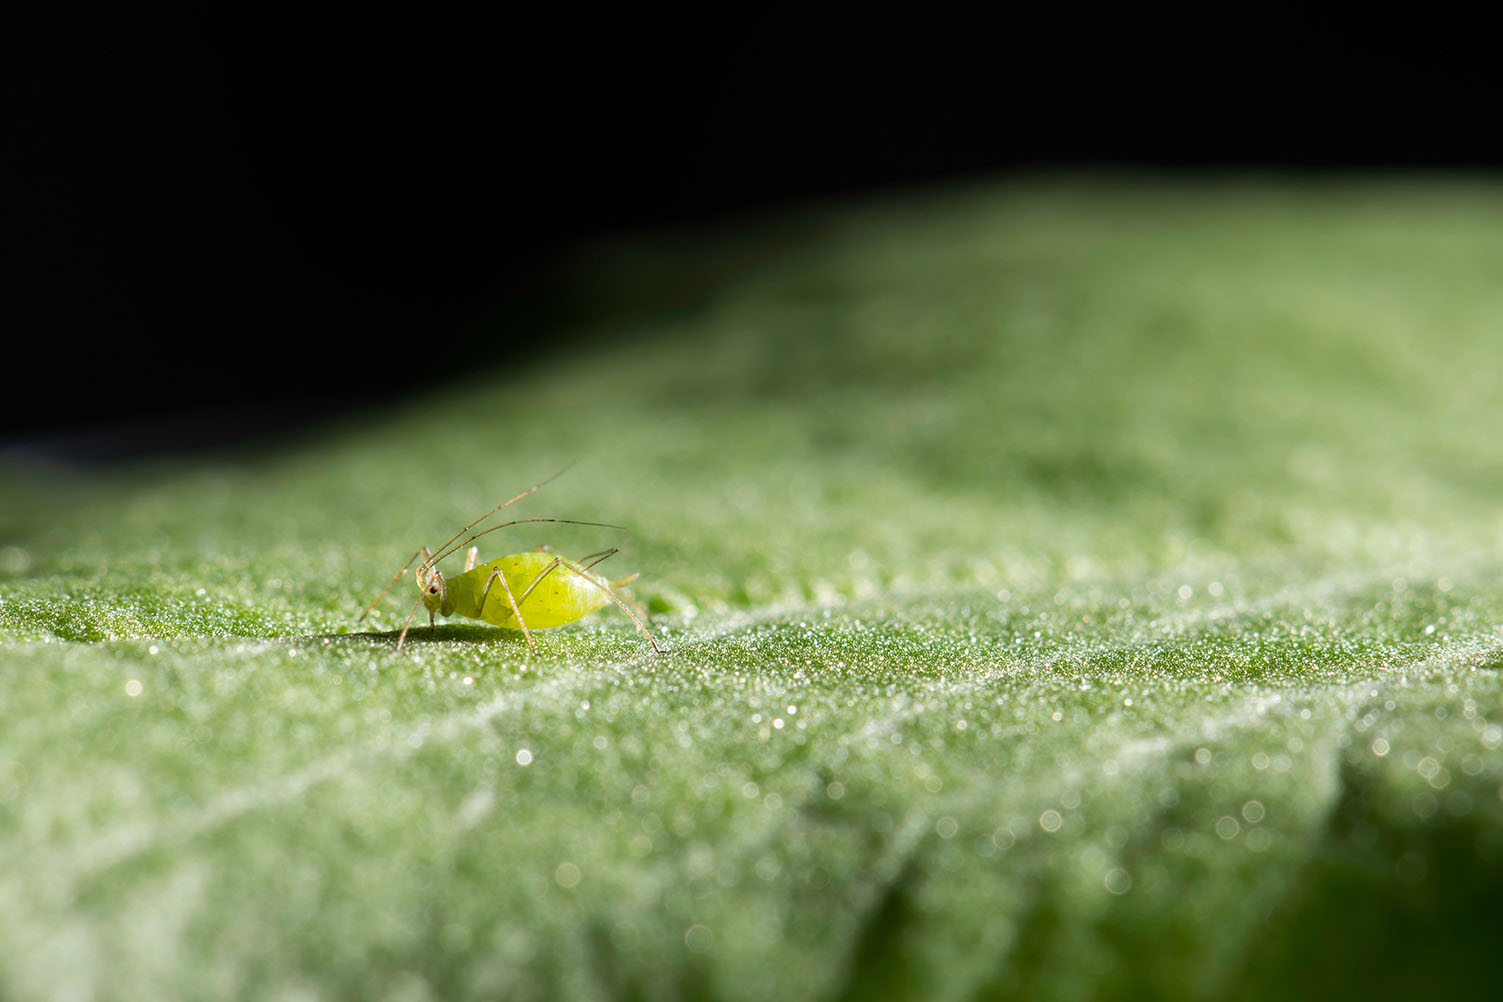 Close up of small green insect (pea aphid) crawling on a leaf.